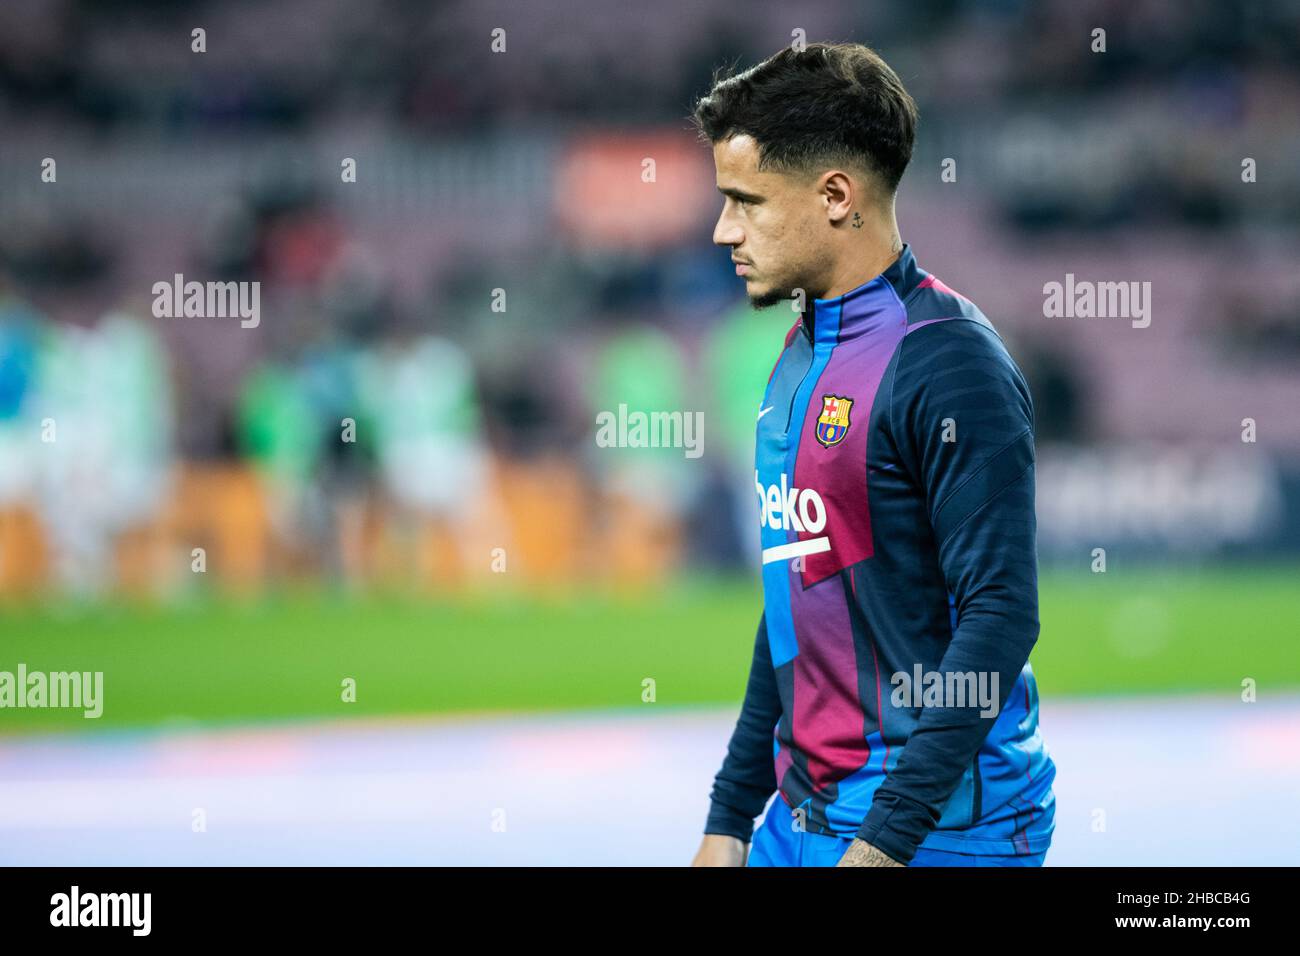 18th December 2021; Nou Camp, Barcelona, Spain: la liga League football, FC Barcelona versus Elche, Coutinho during the warming up before the match Stock Photo